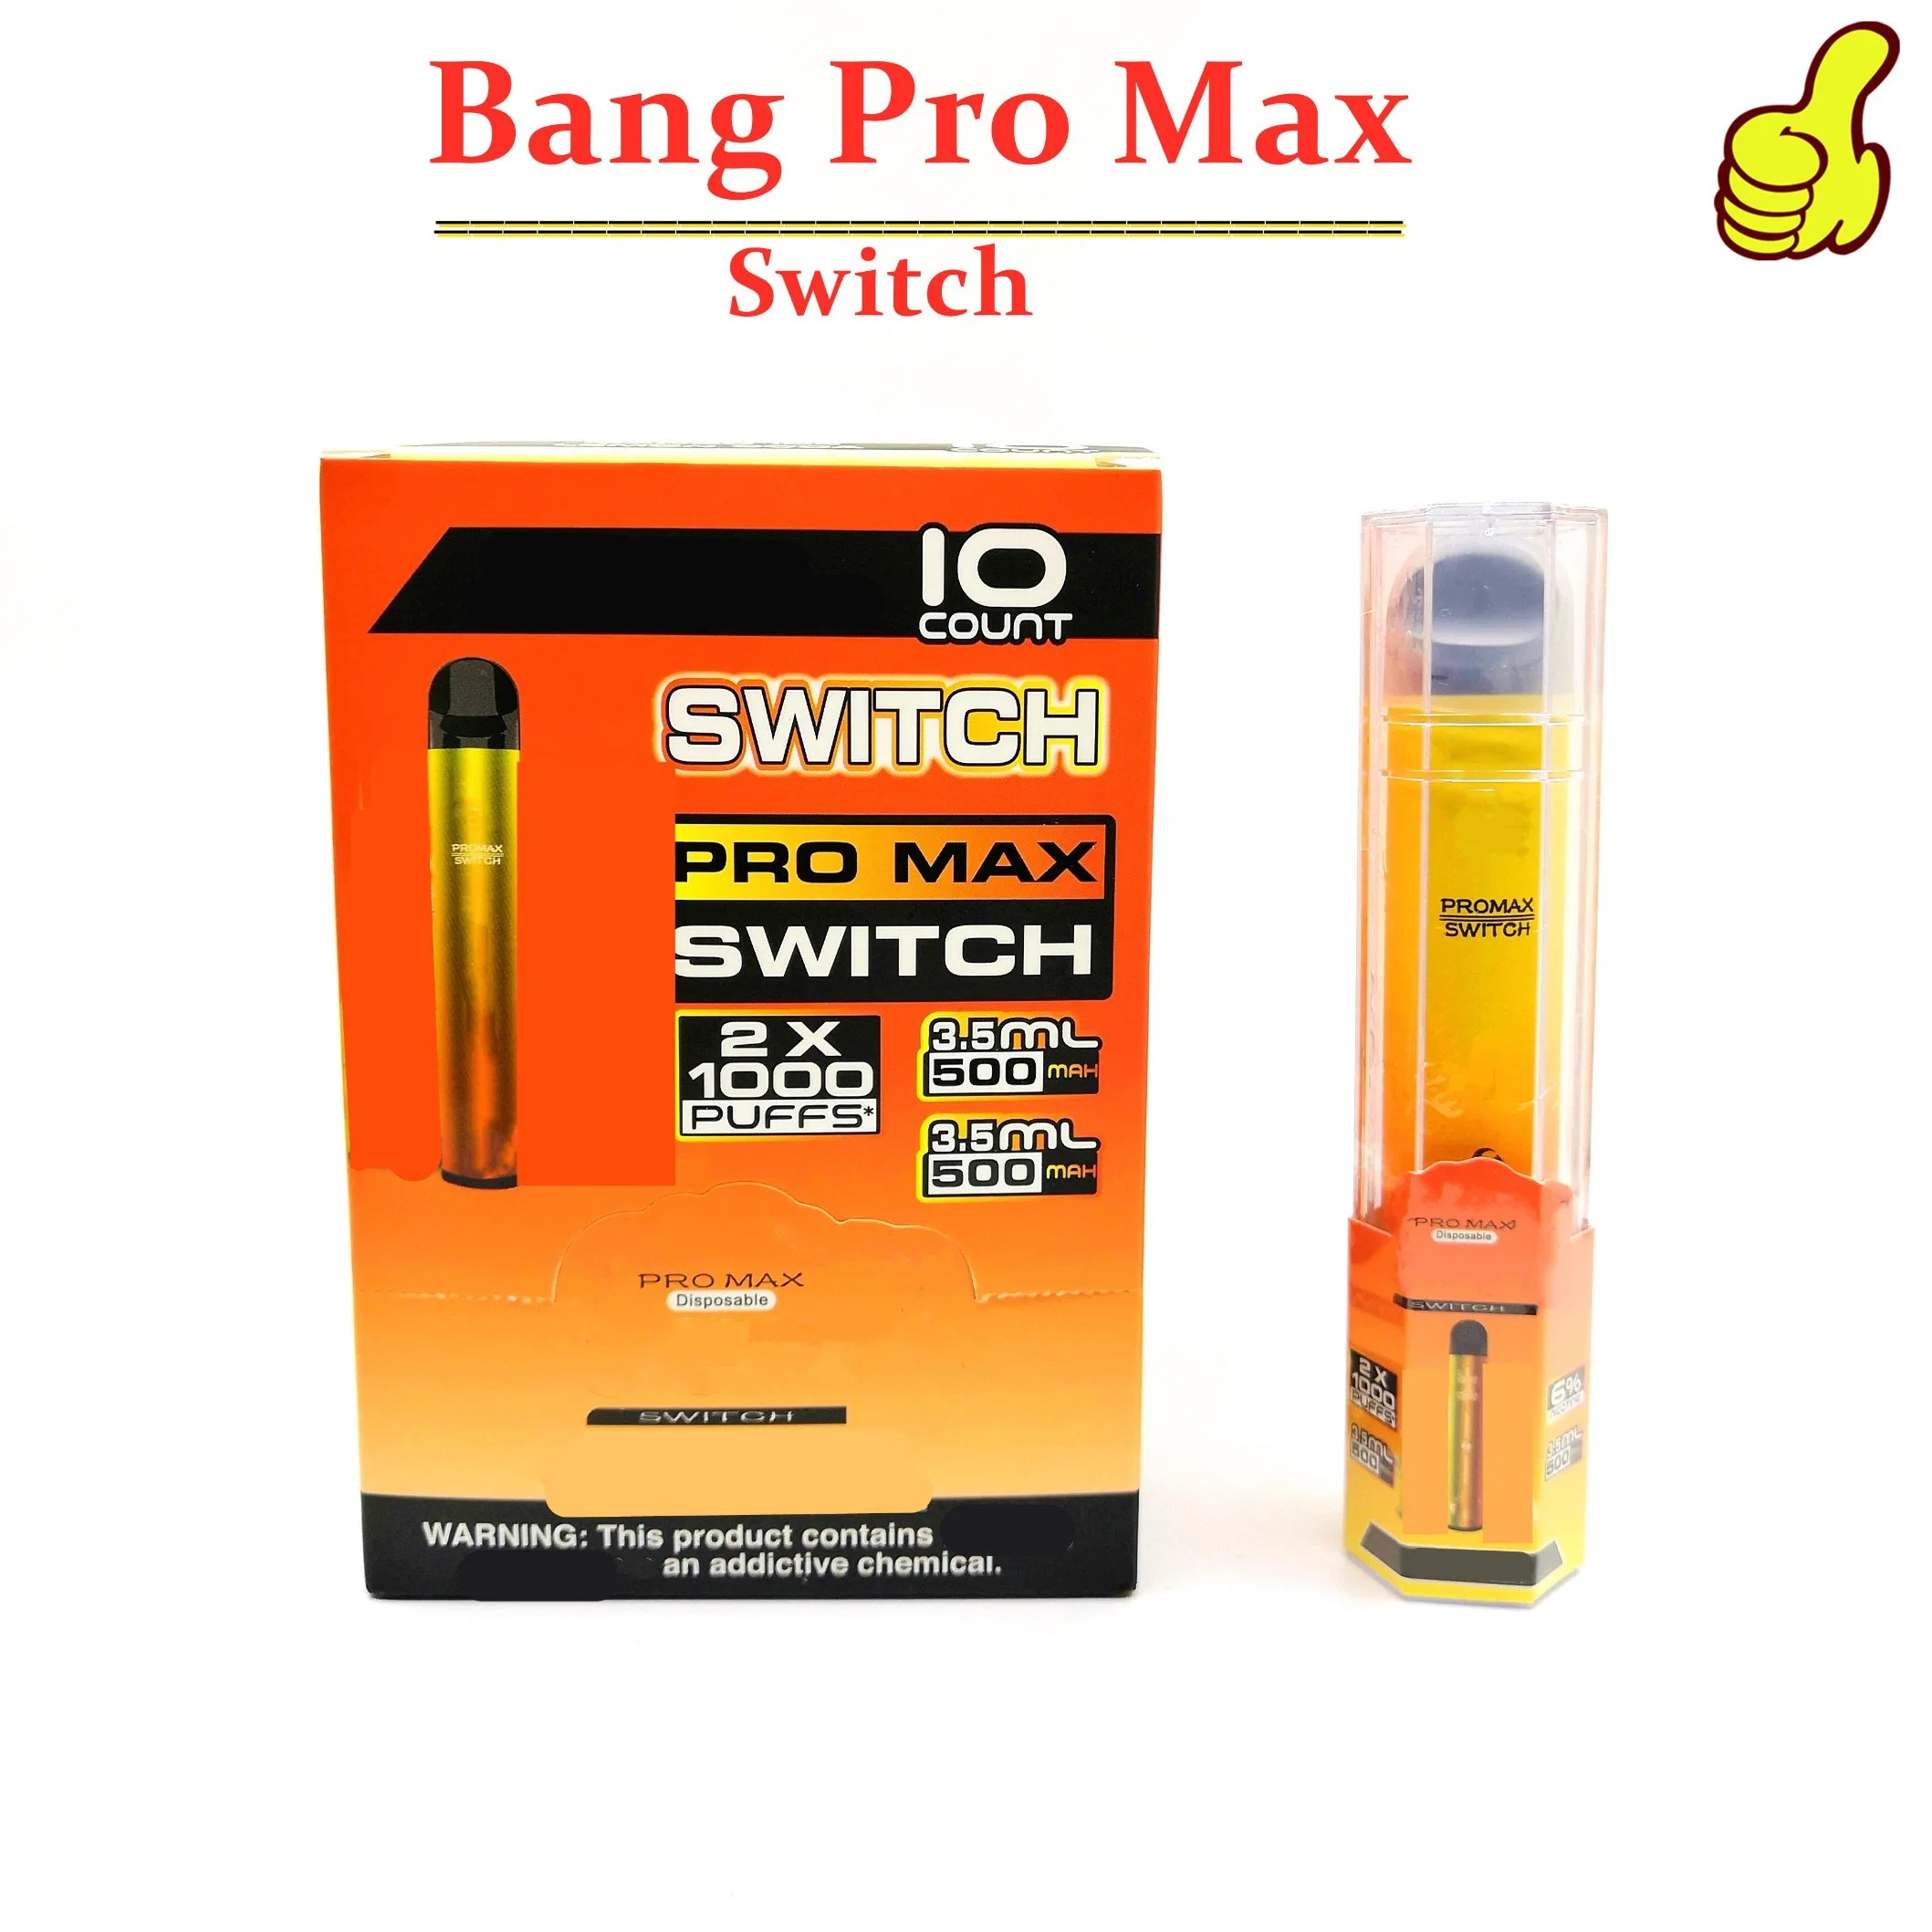 Hot Trend Bang PRO Max Switch 2000 Puffs Electronic Cigarette Wholesale Prices